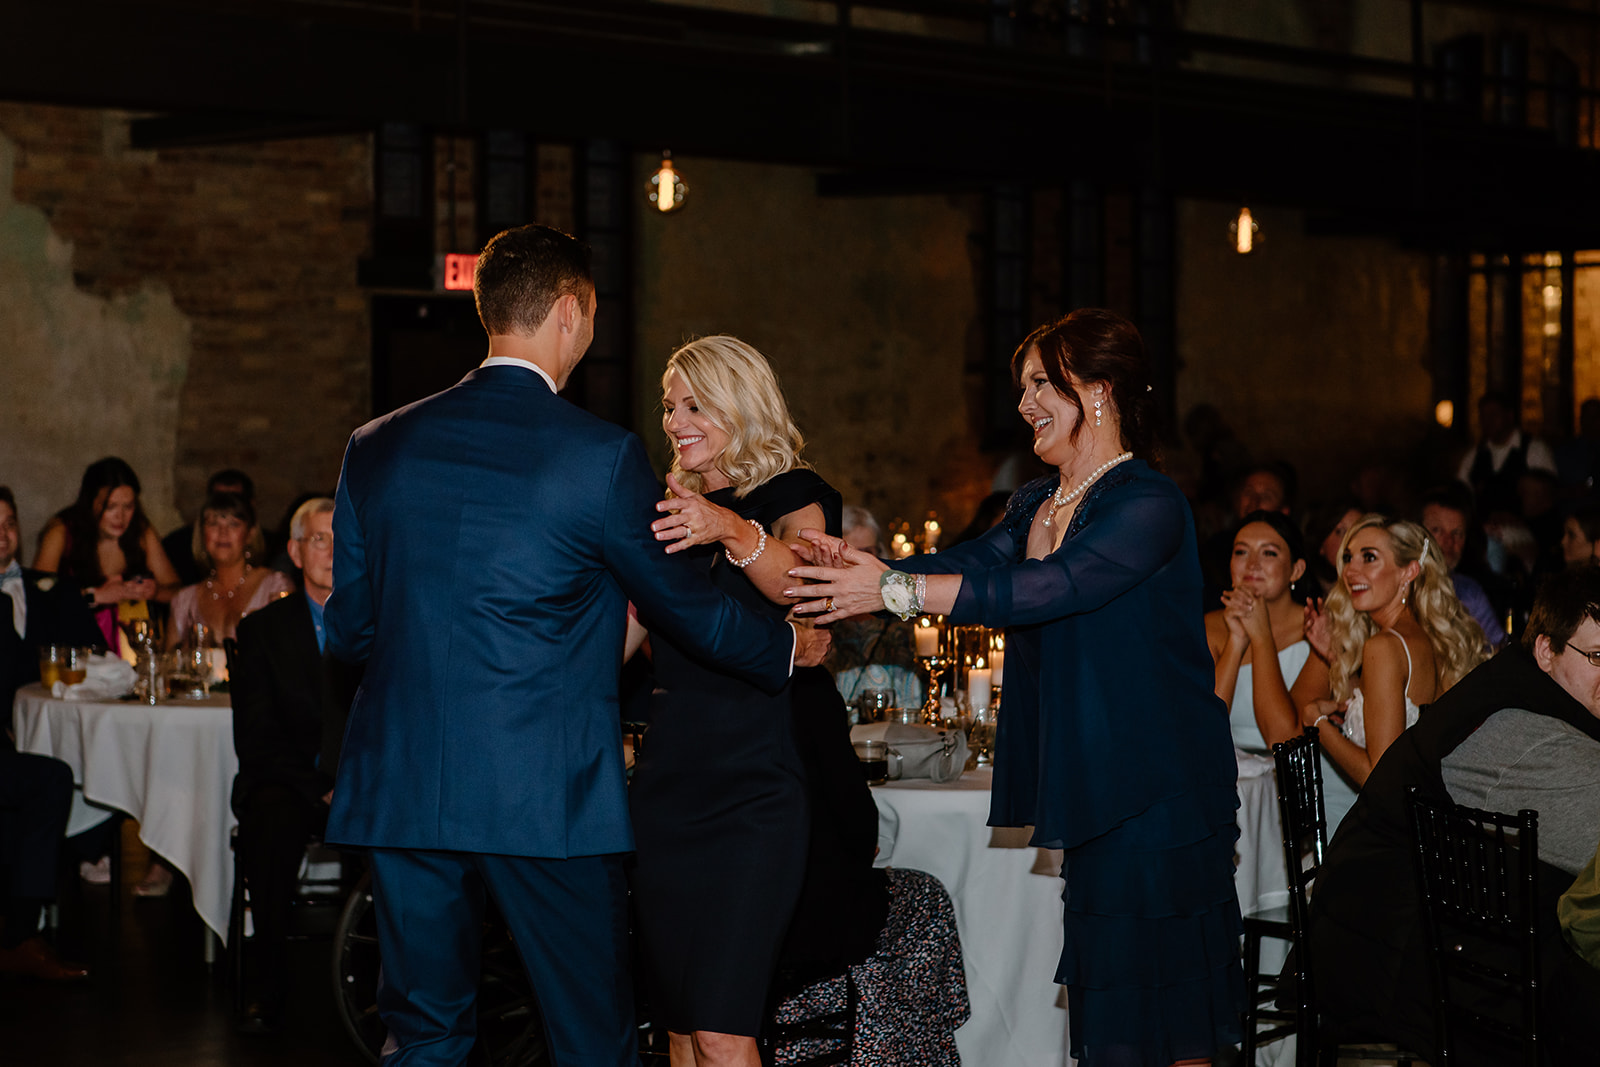 Mother of the groom encourages mother of the bride to dance with her son as well.